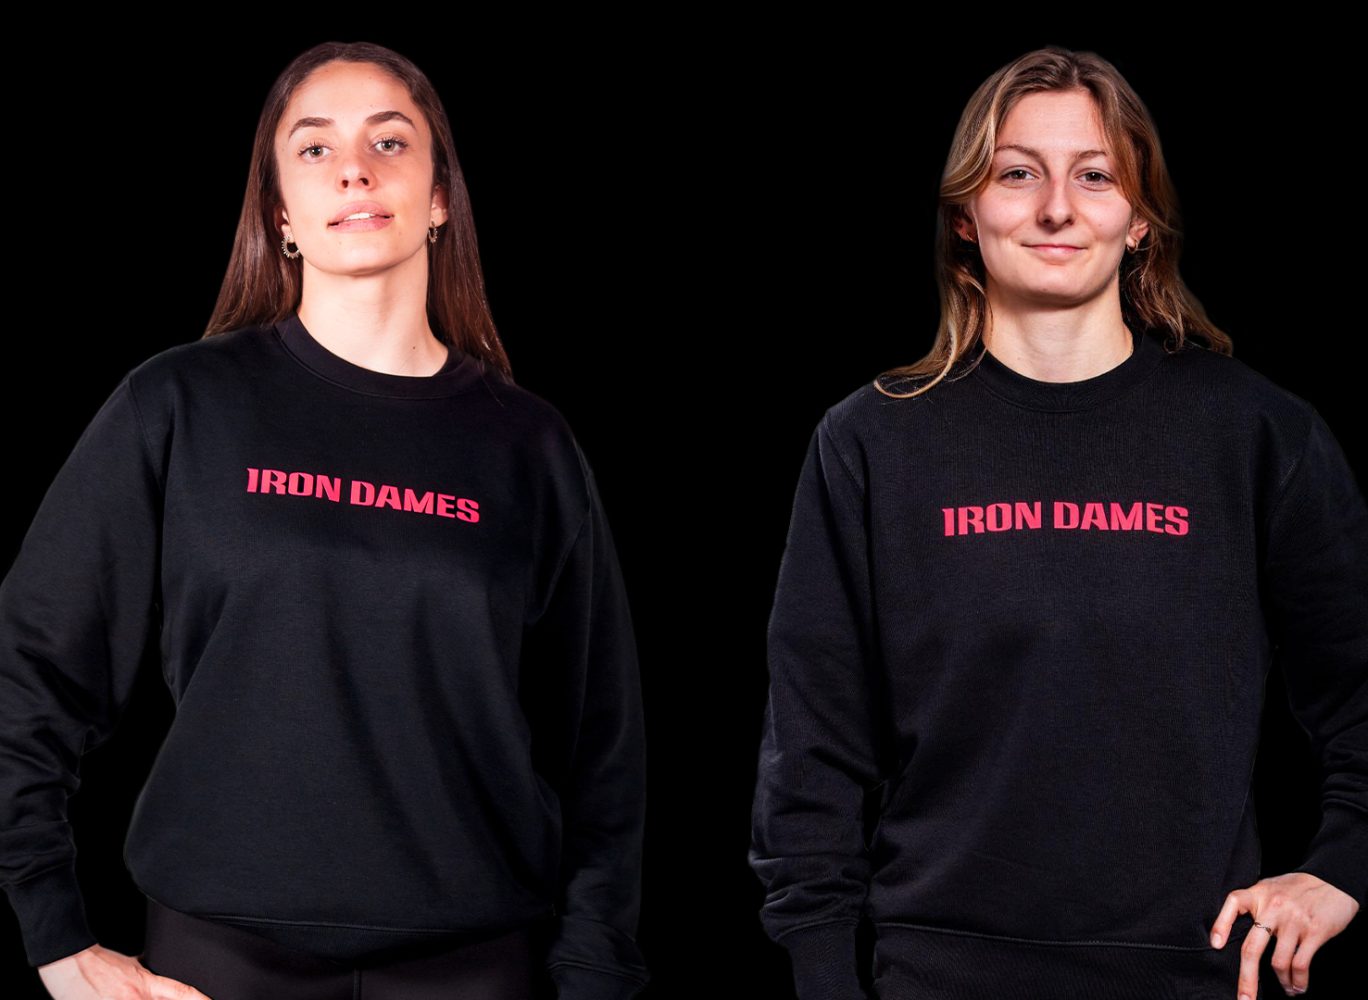 IRON DAMES PROJECT STEPS INTO FRECA WITH A STELLAR FEMALE LINE-UP